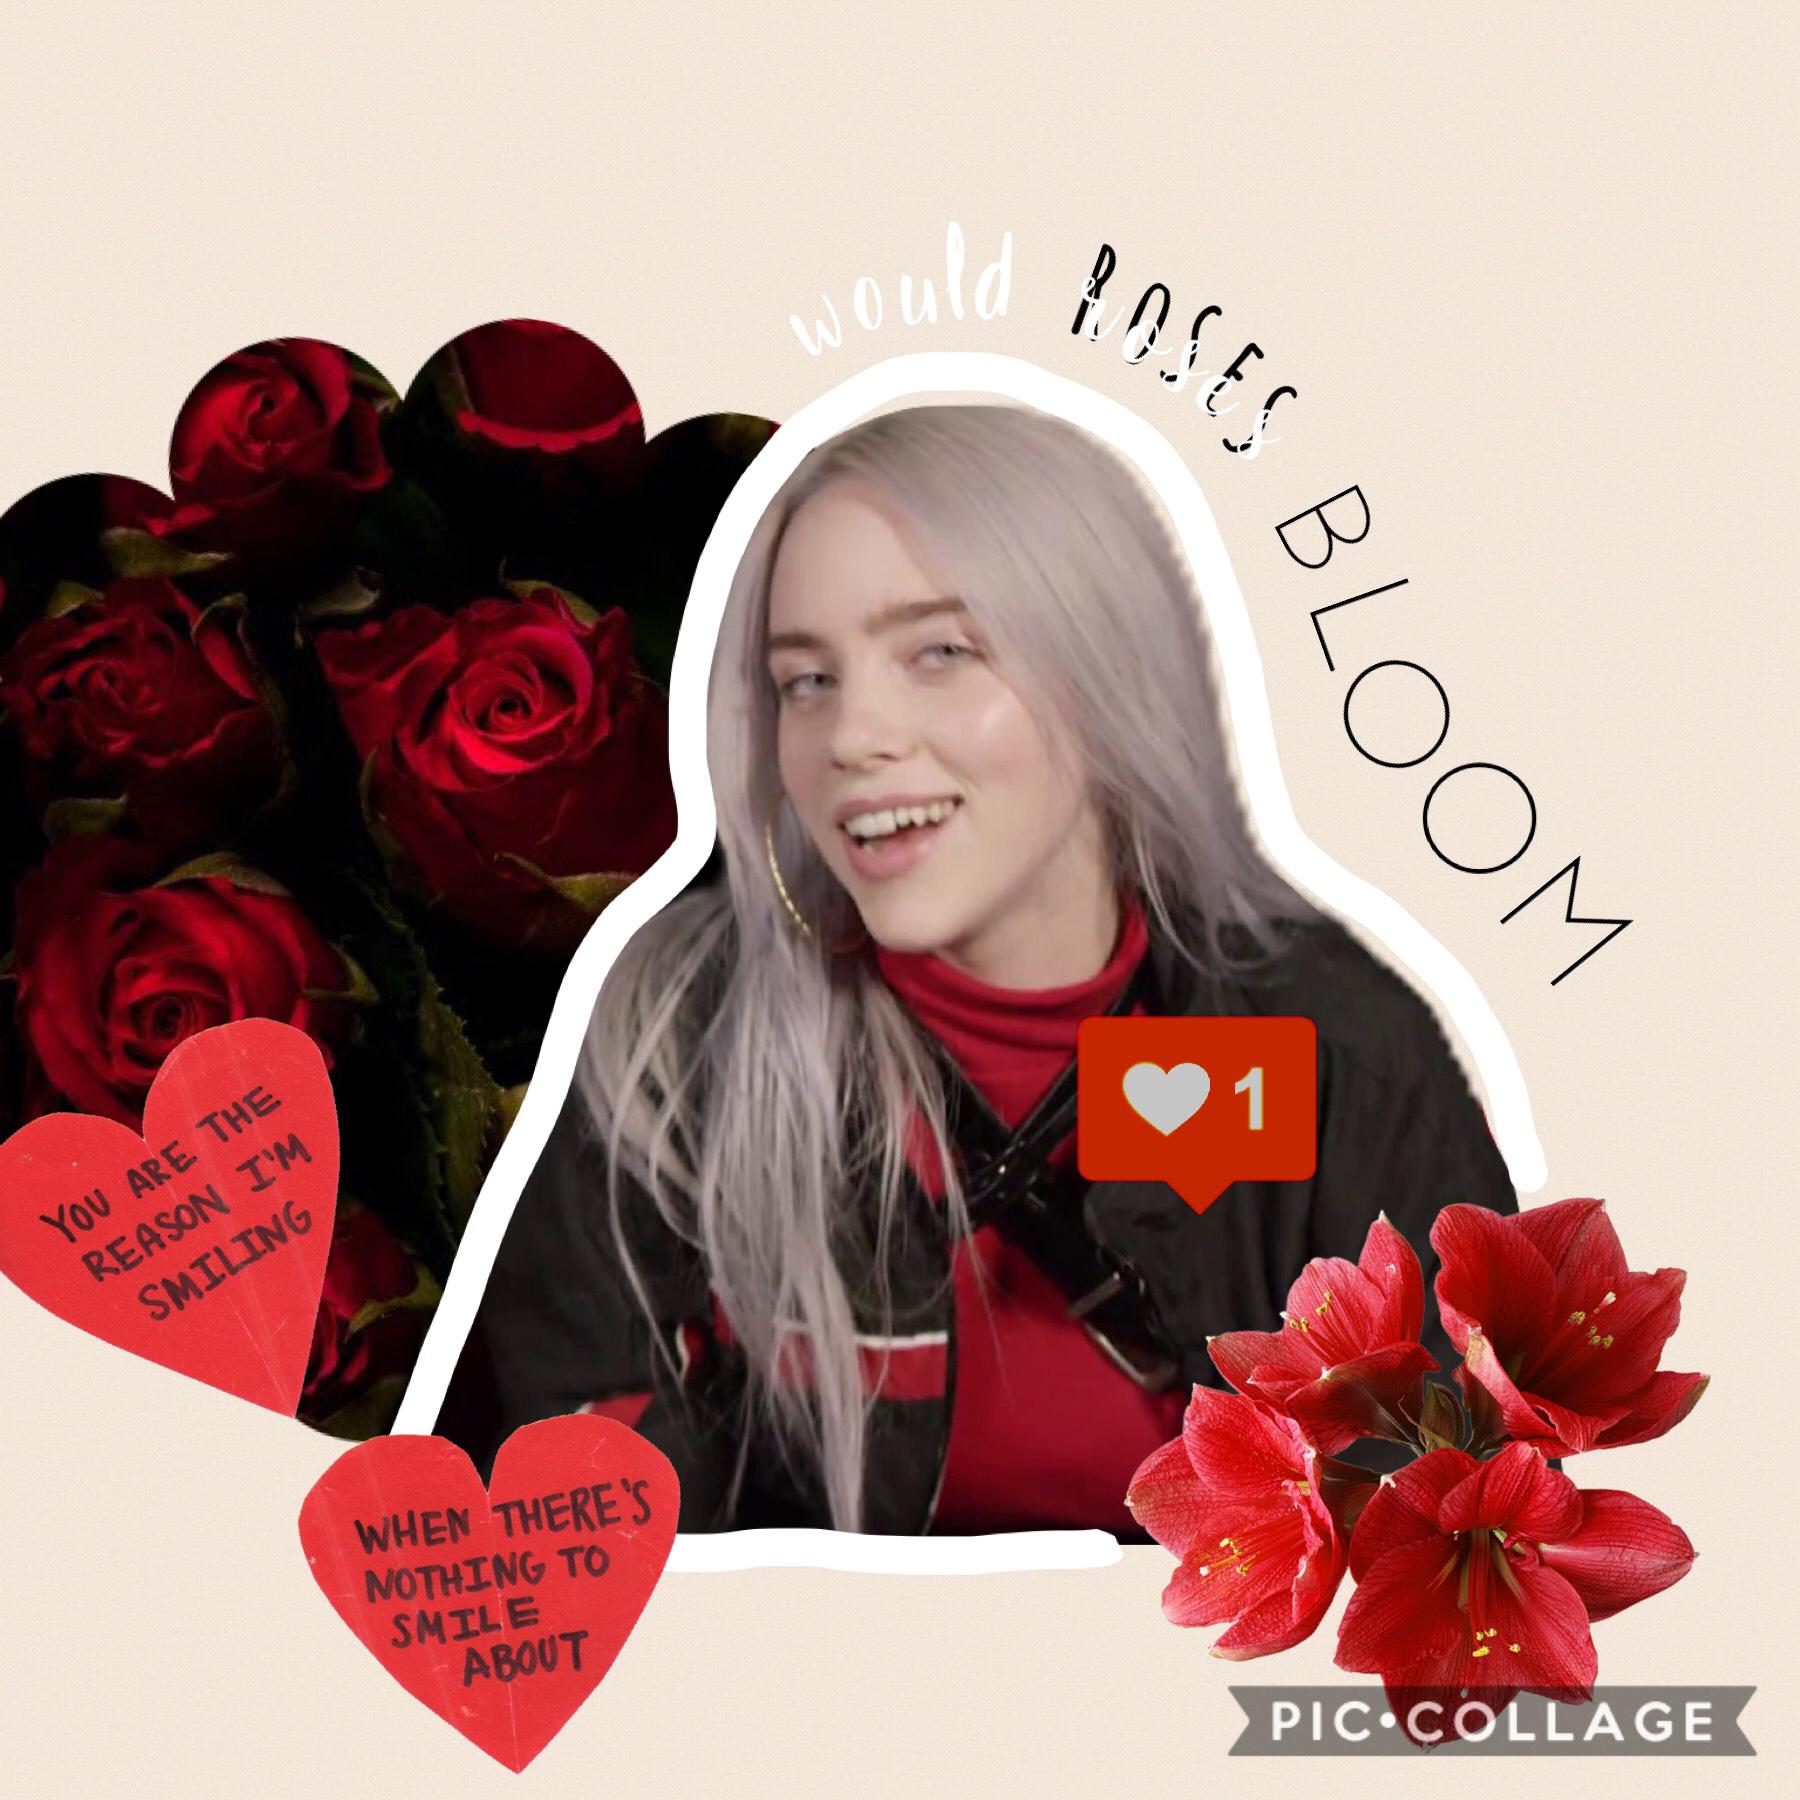 ❤️tappedy tap over here babes❤️
Here we are with another simple Billie edit (are you surprised). Lemme know what you think and also do you reckon I should host a celebrity collage games?? Love ya’ll comment if ya wann collab 💖💖💖